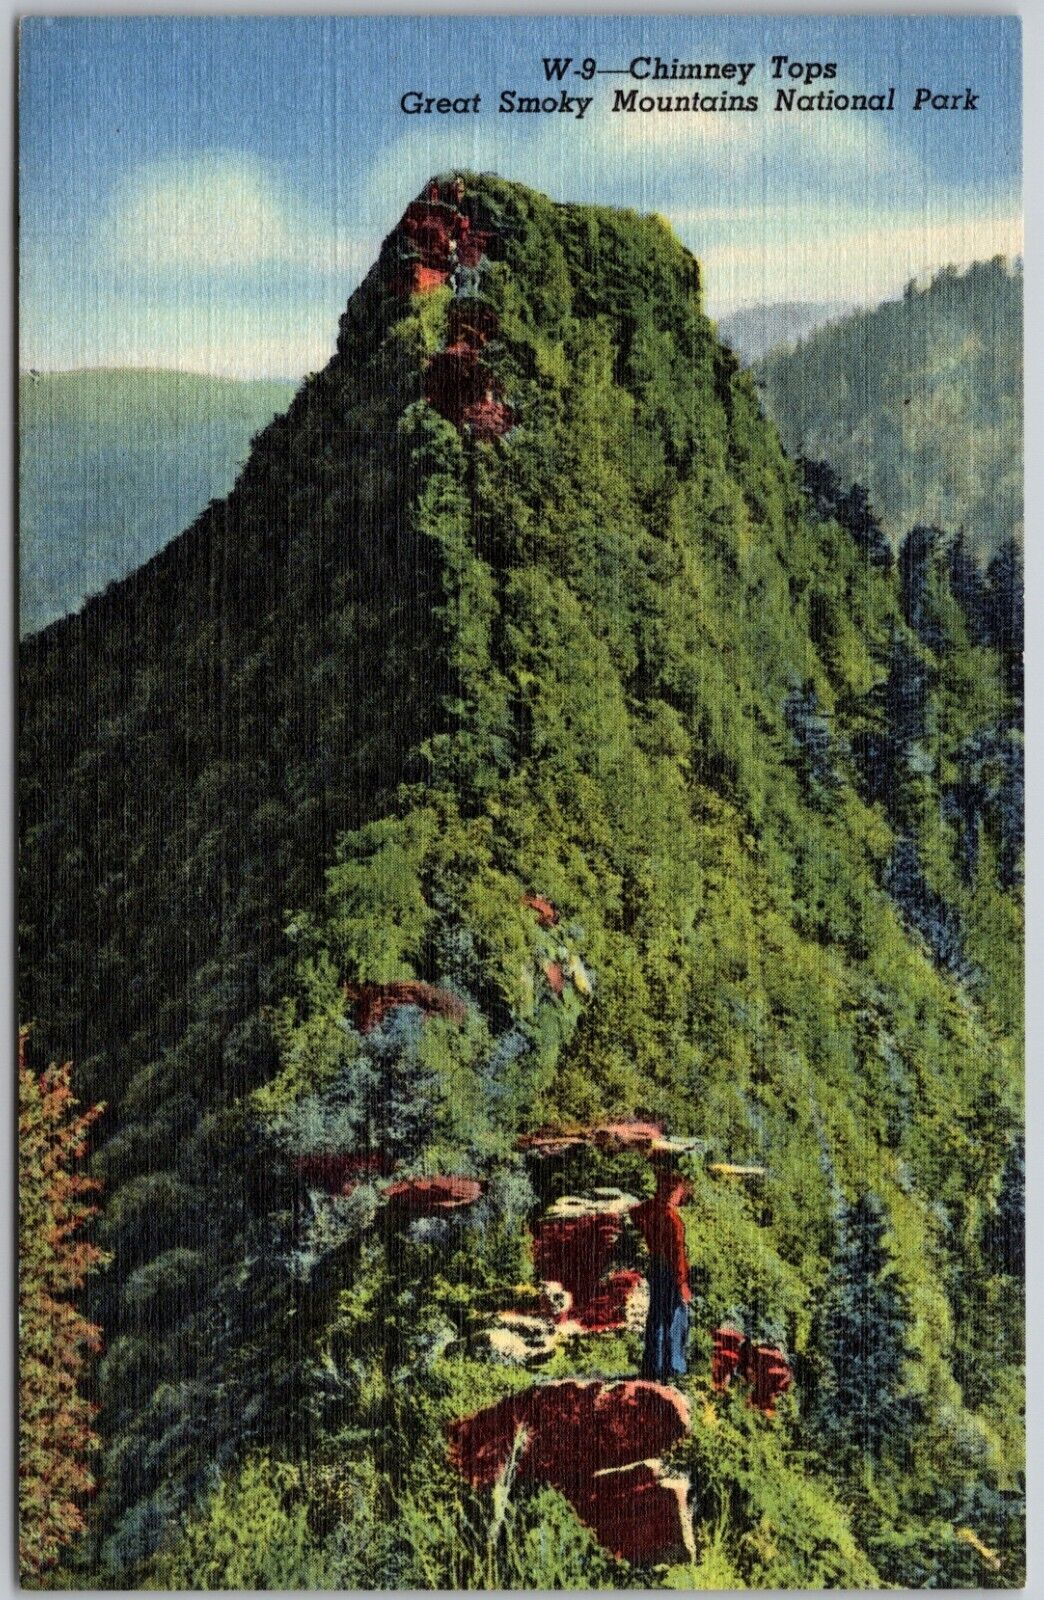 Chimney Tops - Great Smoky Mountains National Park - 1947 Postcard 5075